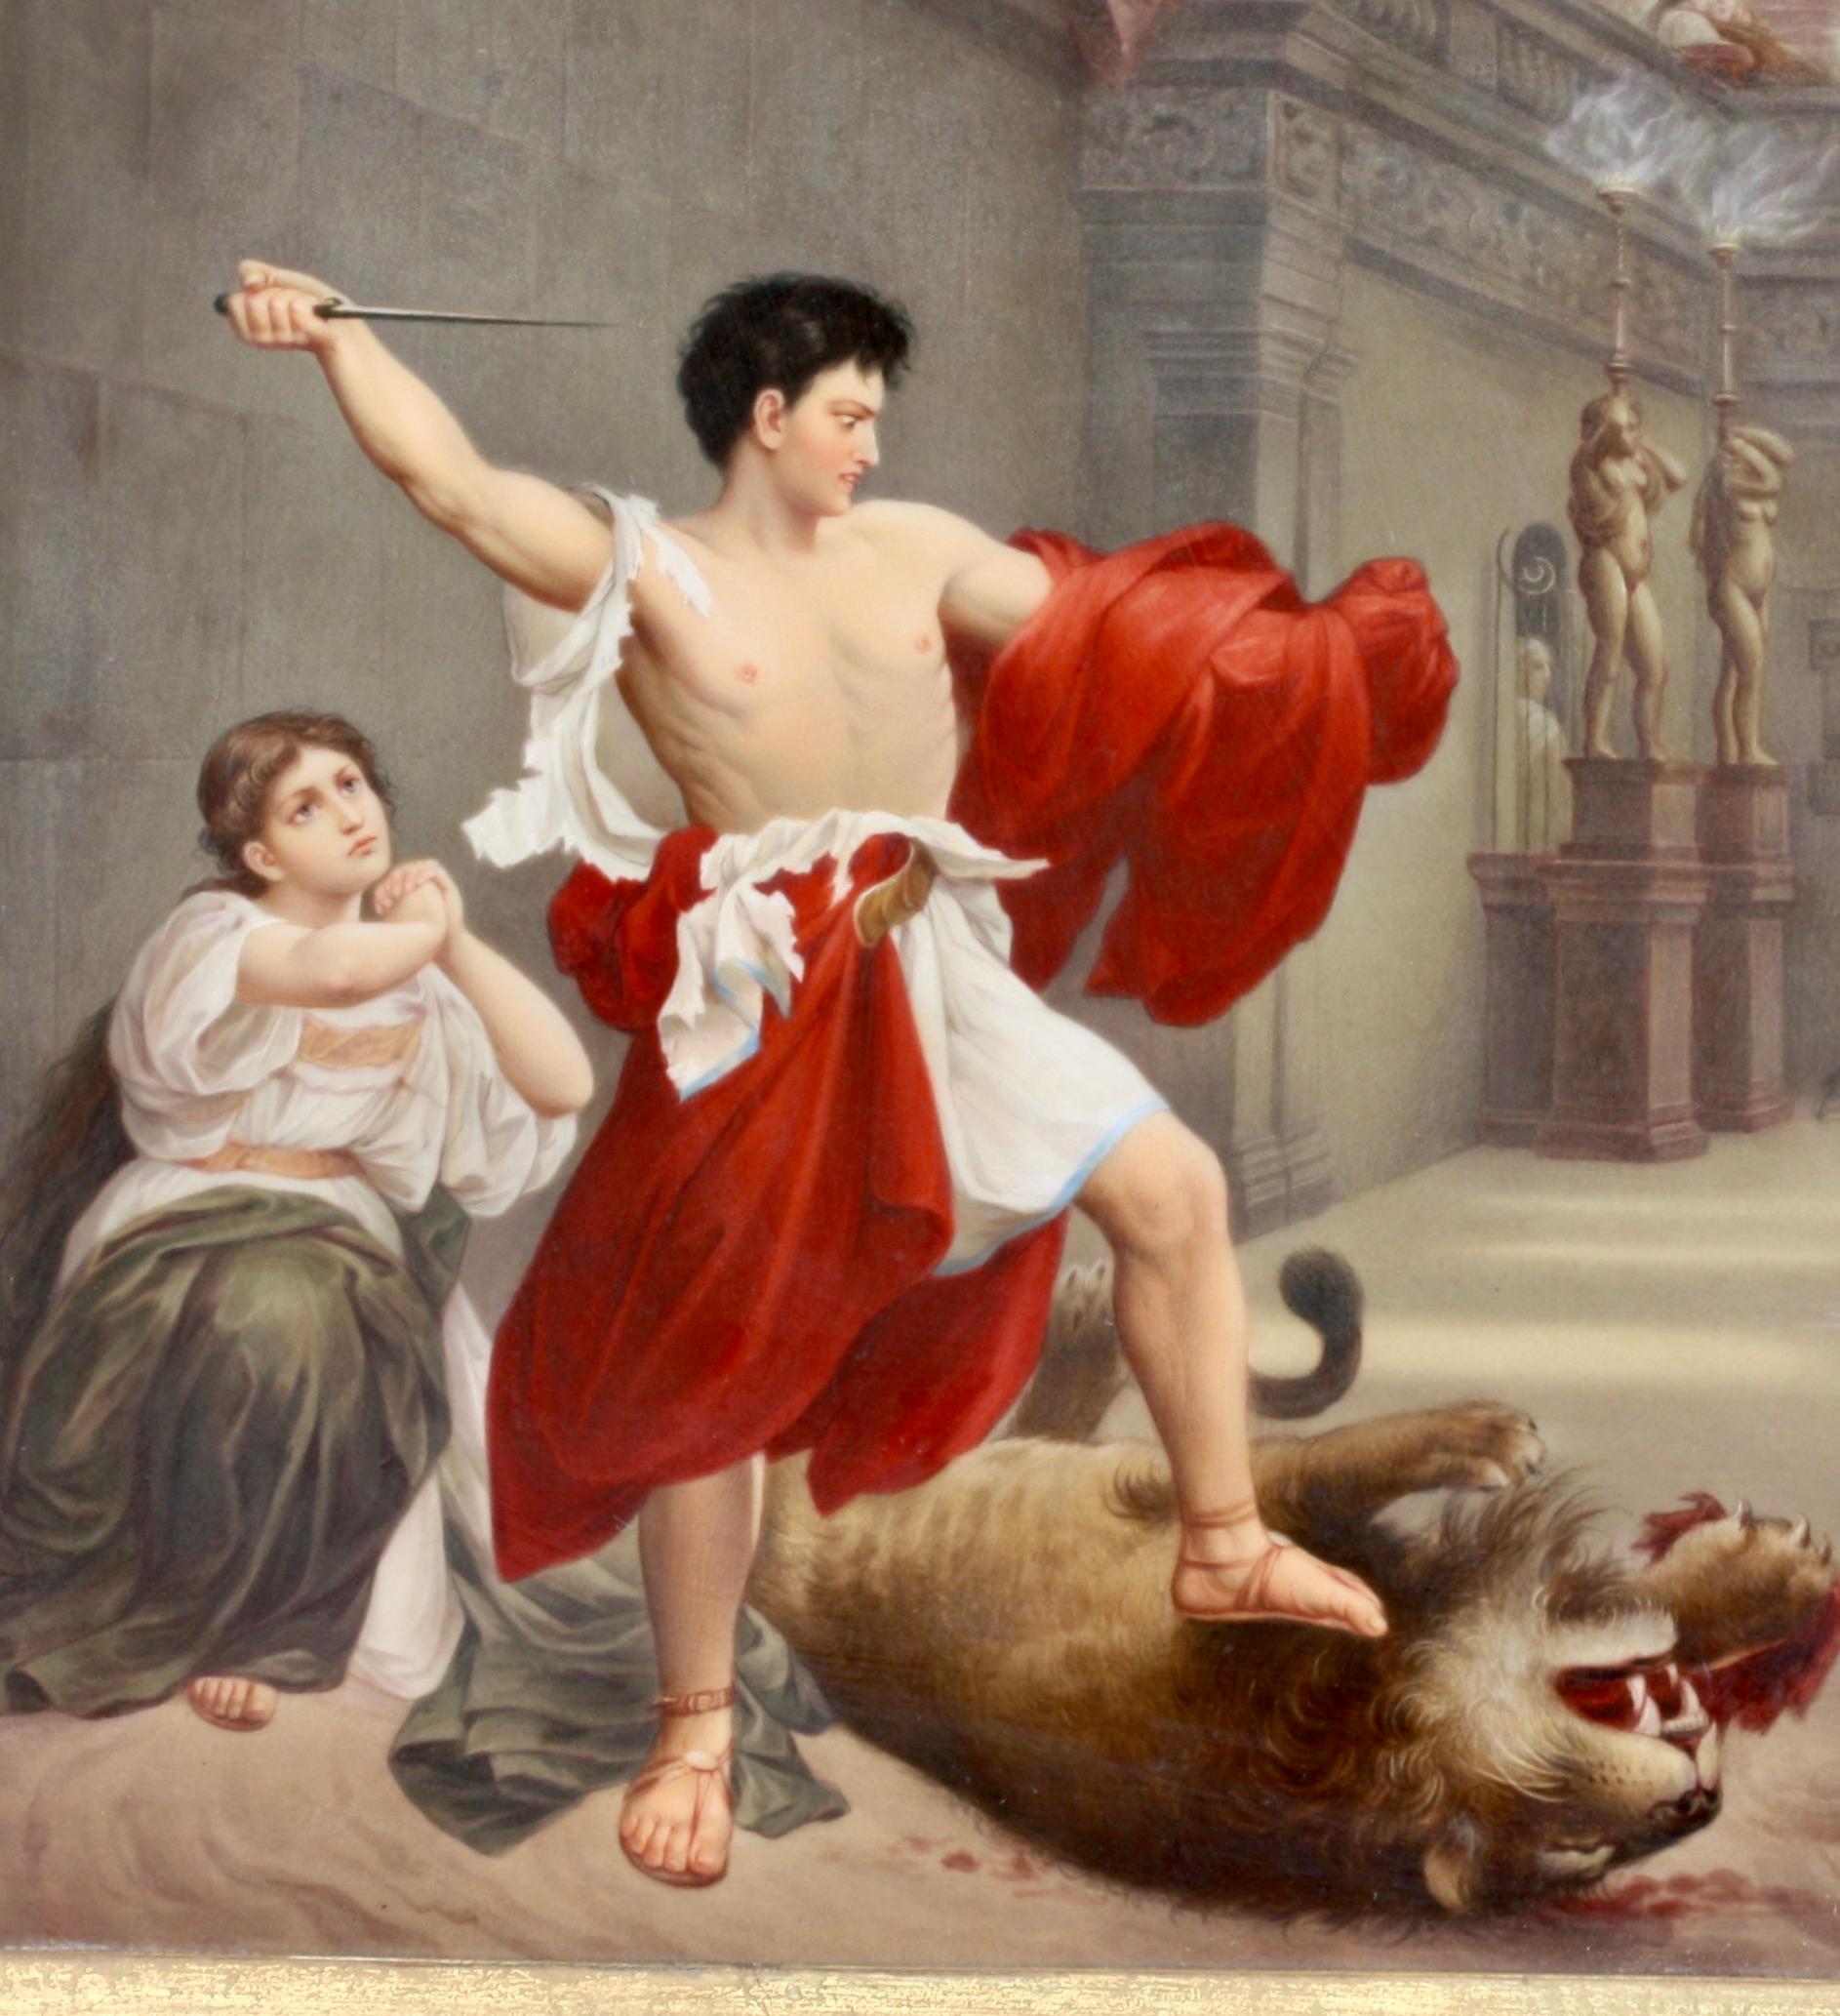 A Berlin (K.P.M.) porcelain plaque,
Late 19th century
finely painted after Defregger with a man fighting lions in ancient Rome
impressed to verso KPM with sceptre mark
Size with frame
Height 17.0 in. (43.18 cm.)
Width 19.5 in. (49.53